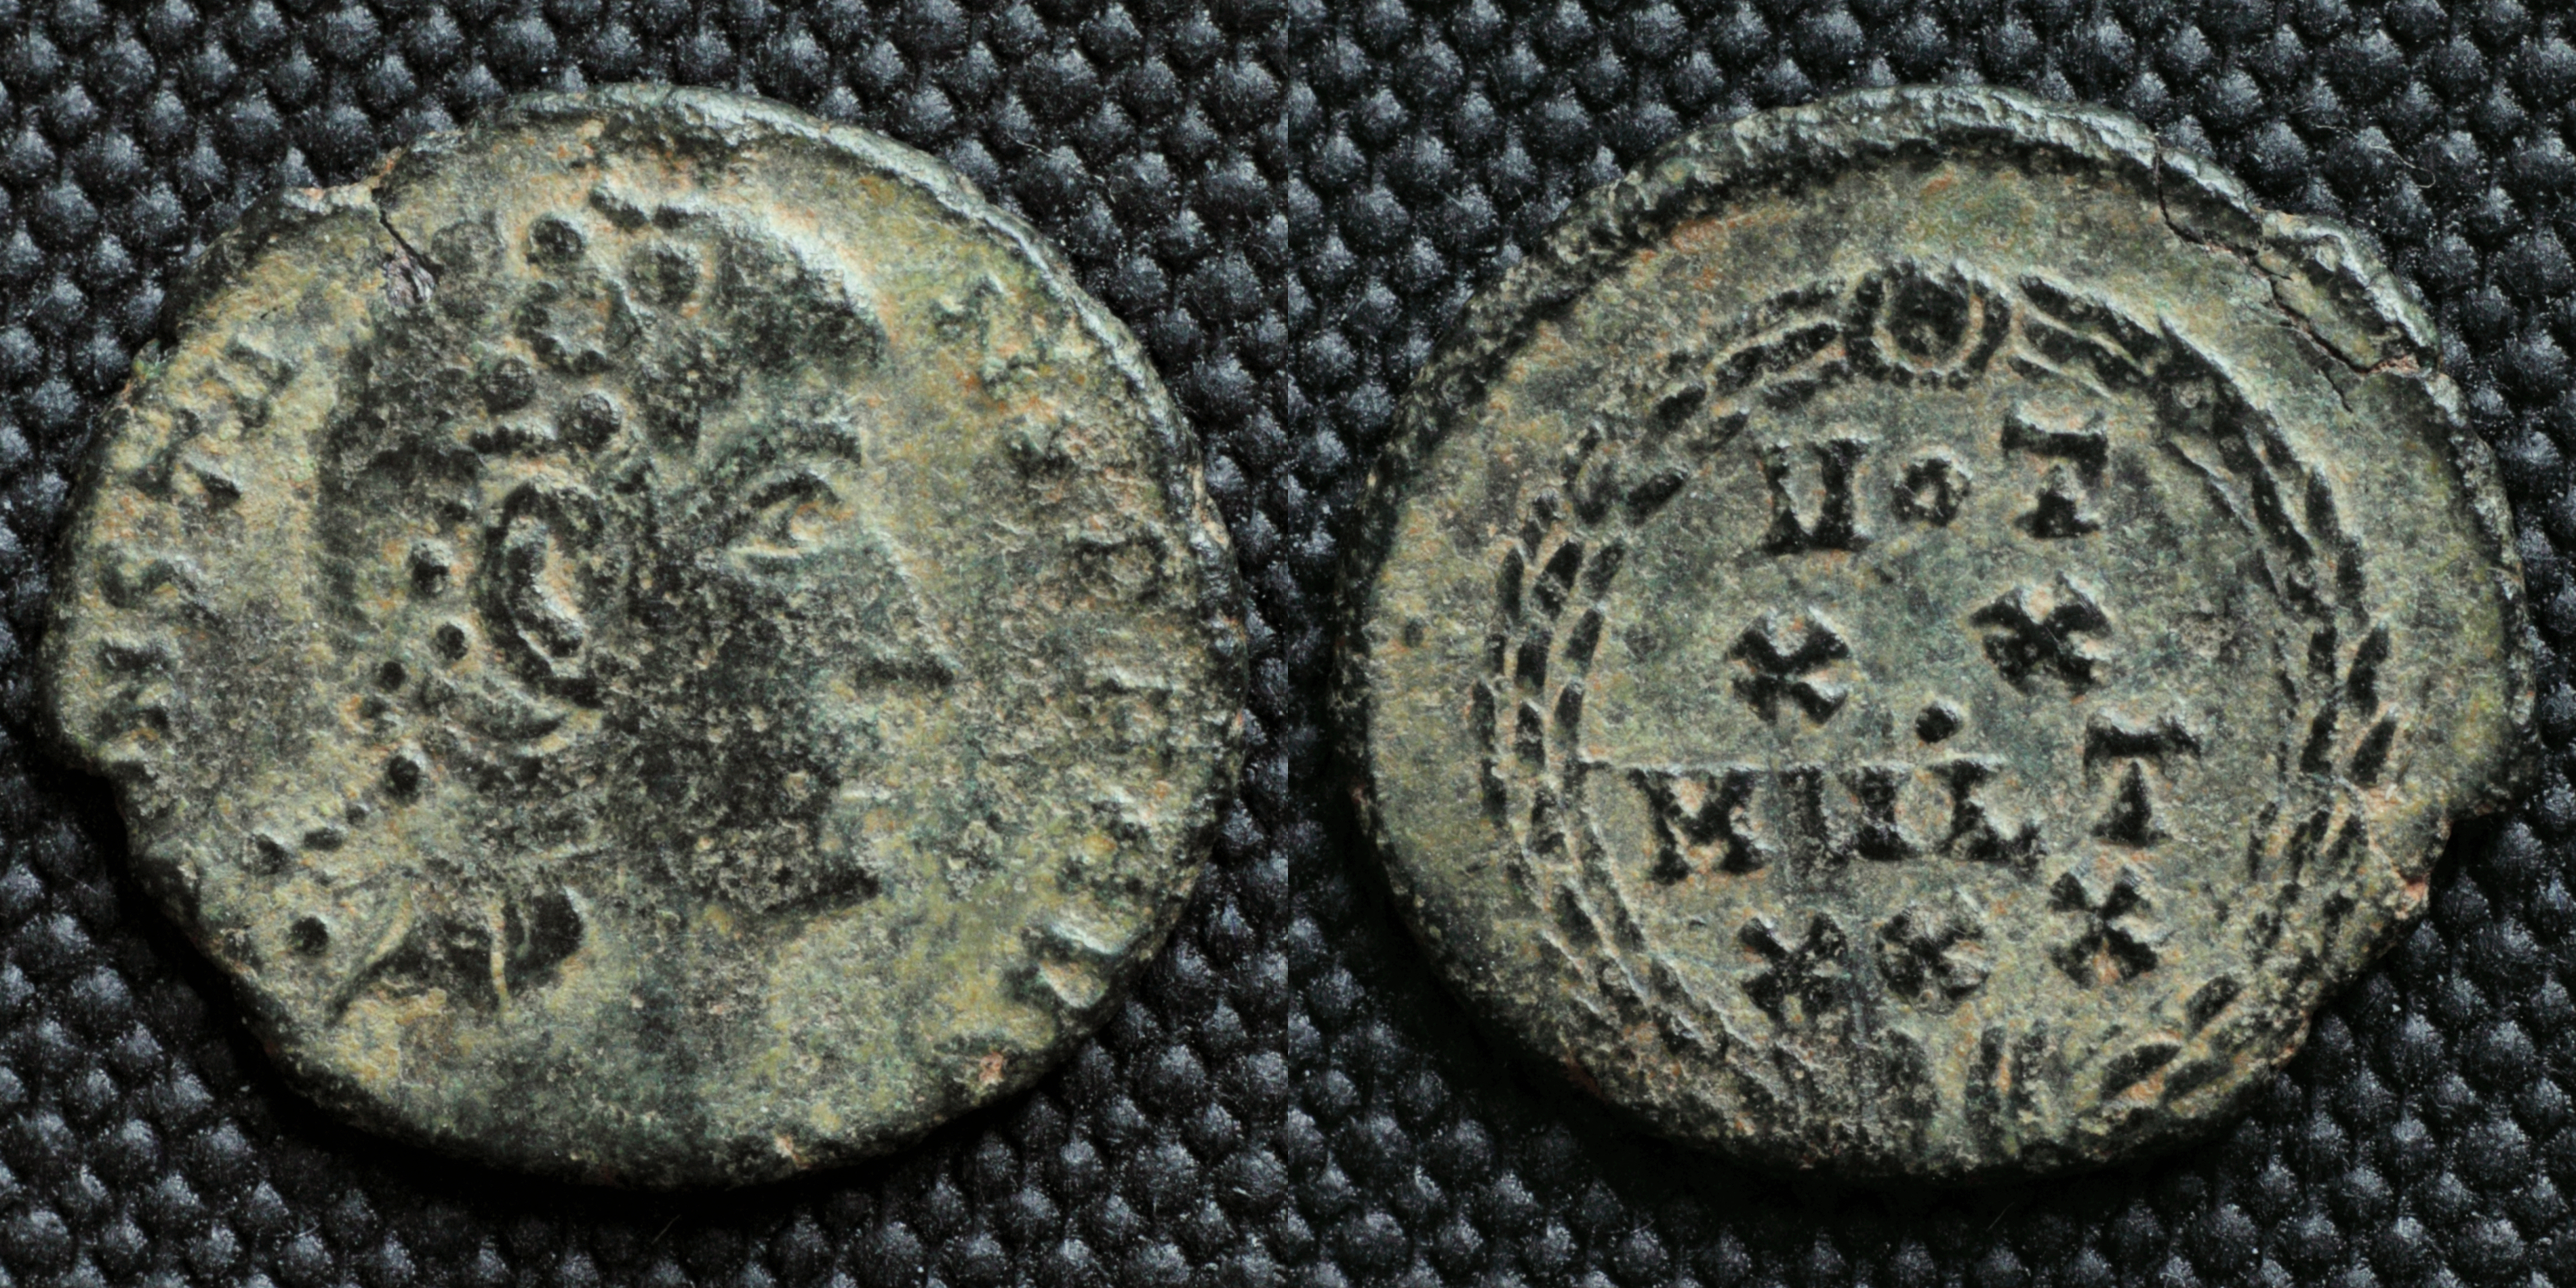 /Files/Images/Coinsite/CoinDB/39_Constans.jpg